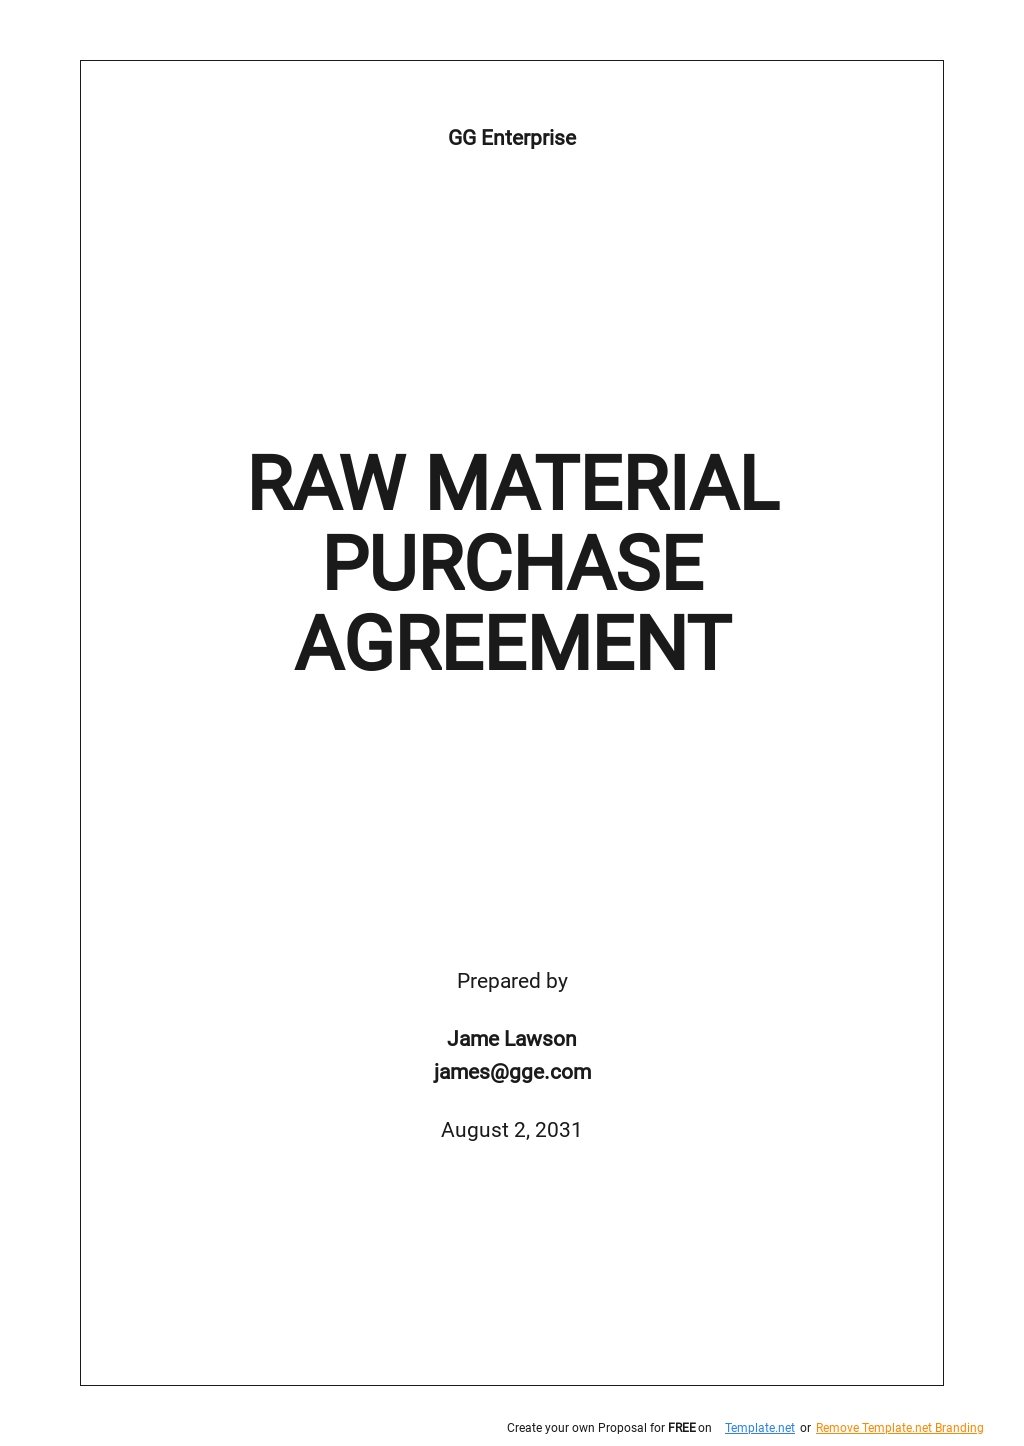 Raw Material Purchase Agreement Template - Google Docs, Word For raw material purchase agreement template